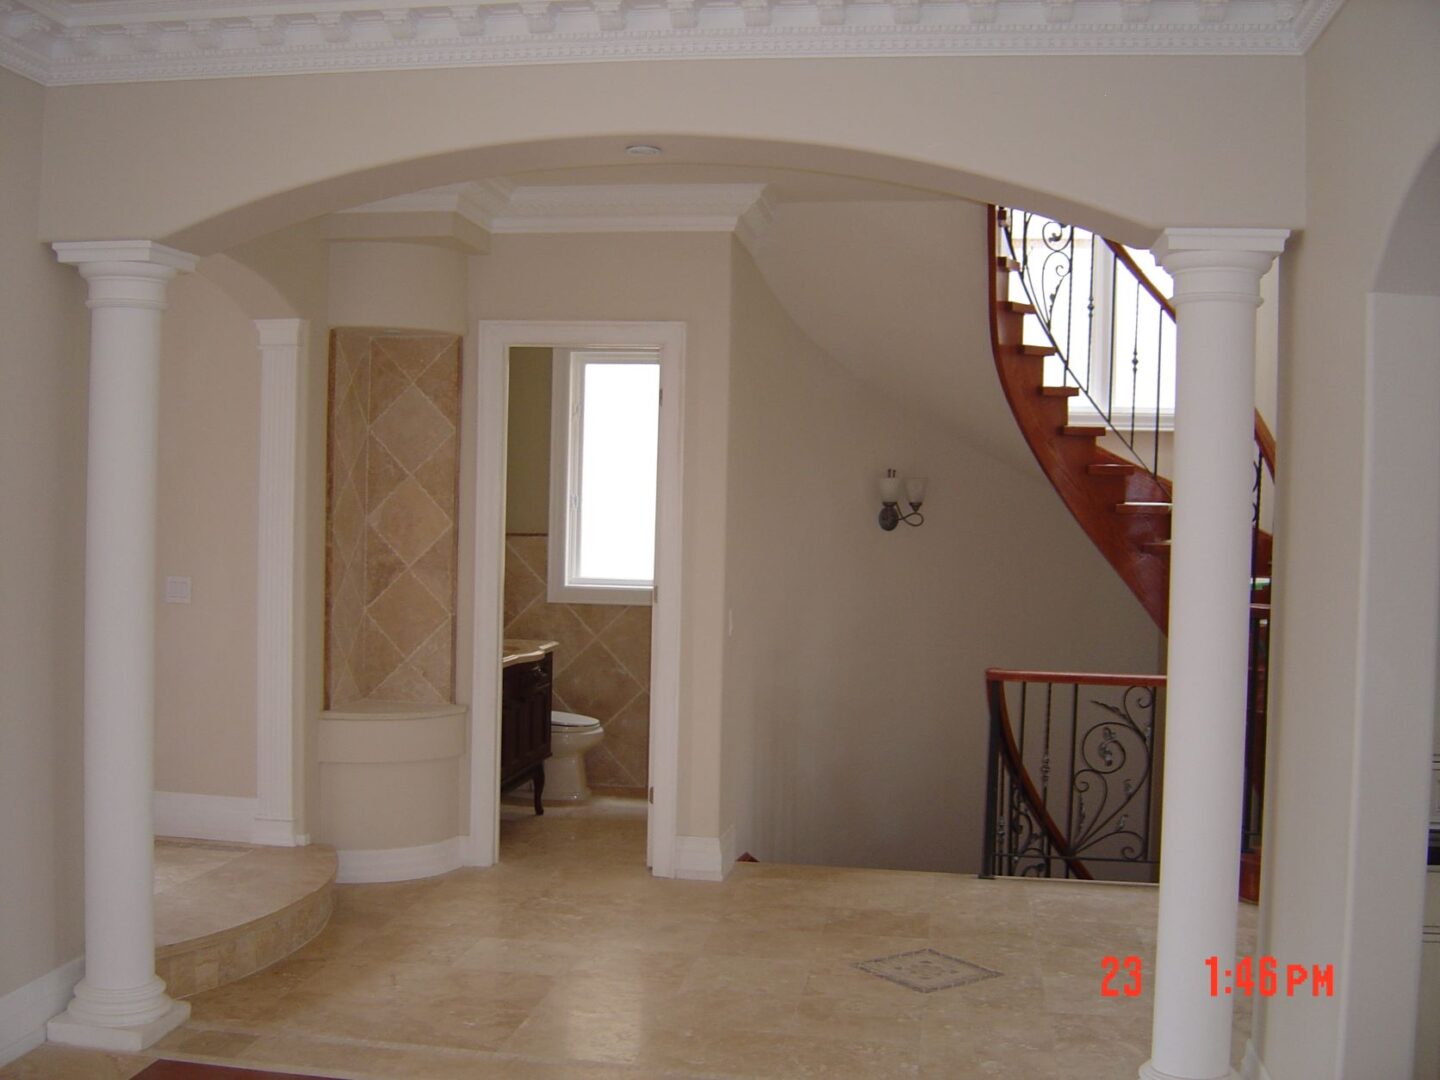 A White Wall With Cream Detailing With Pillars